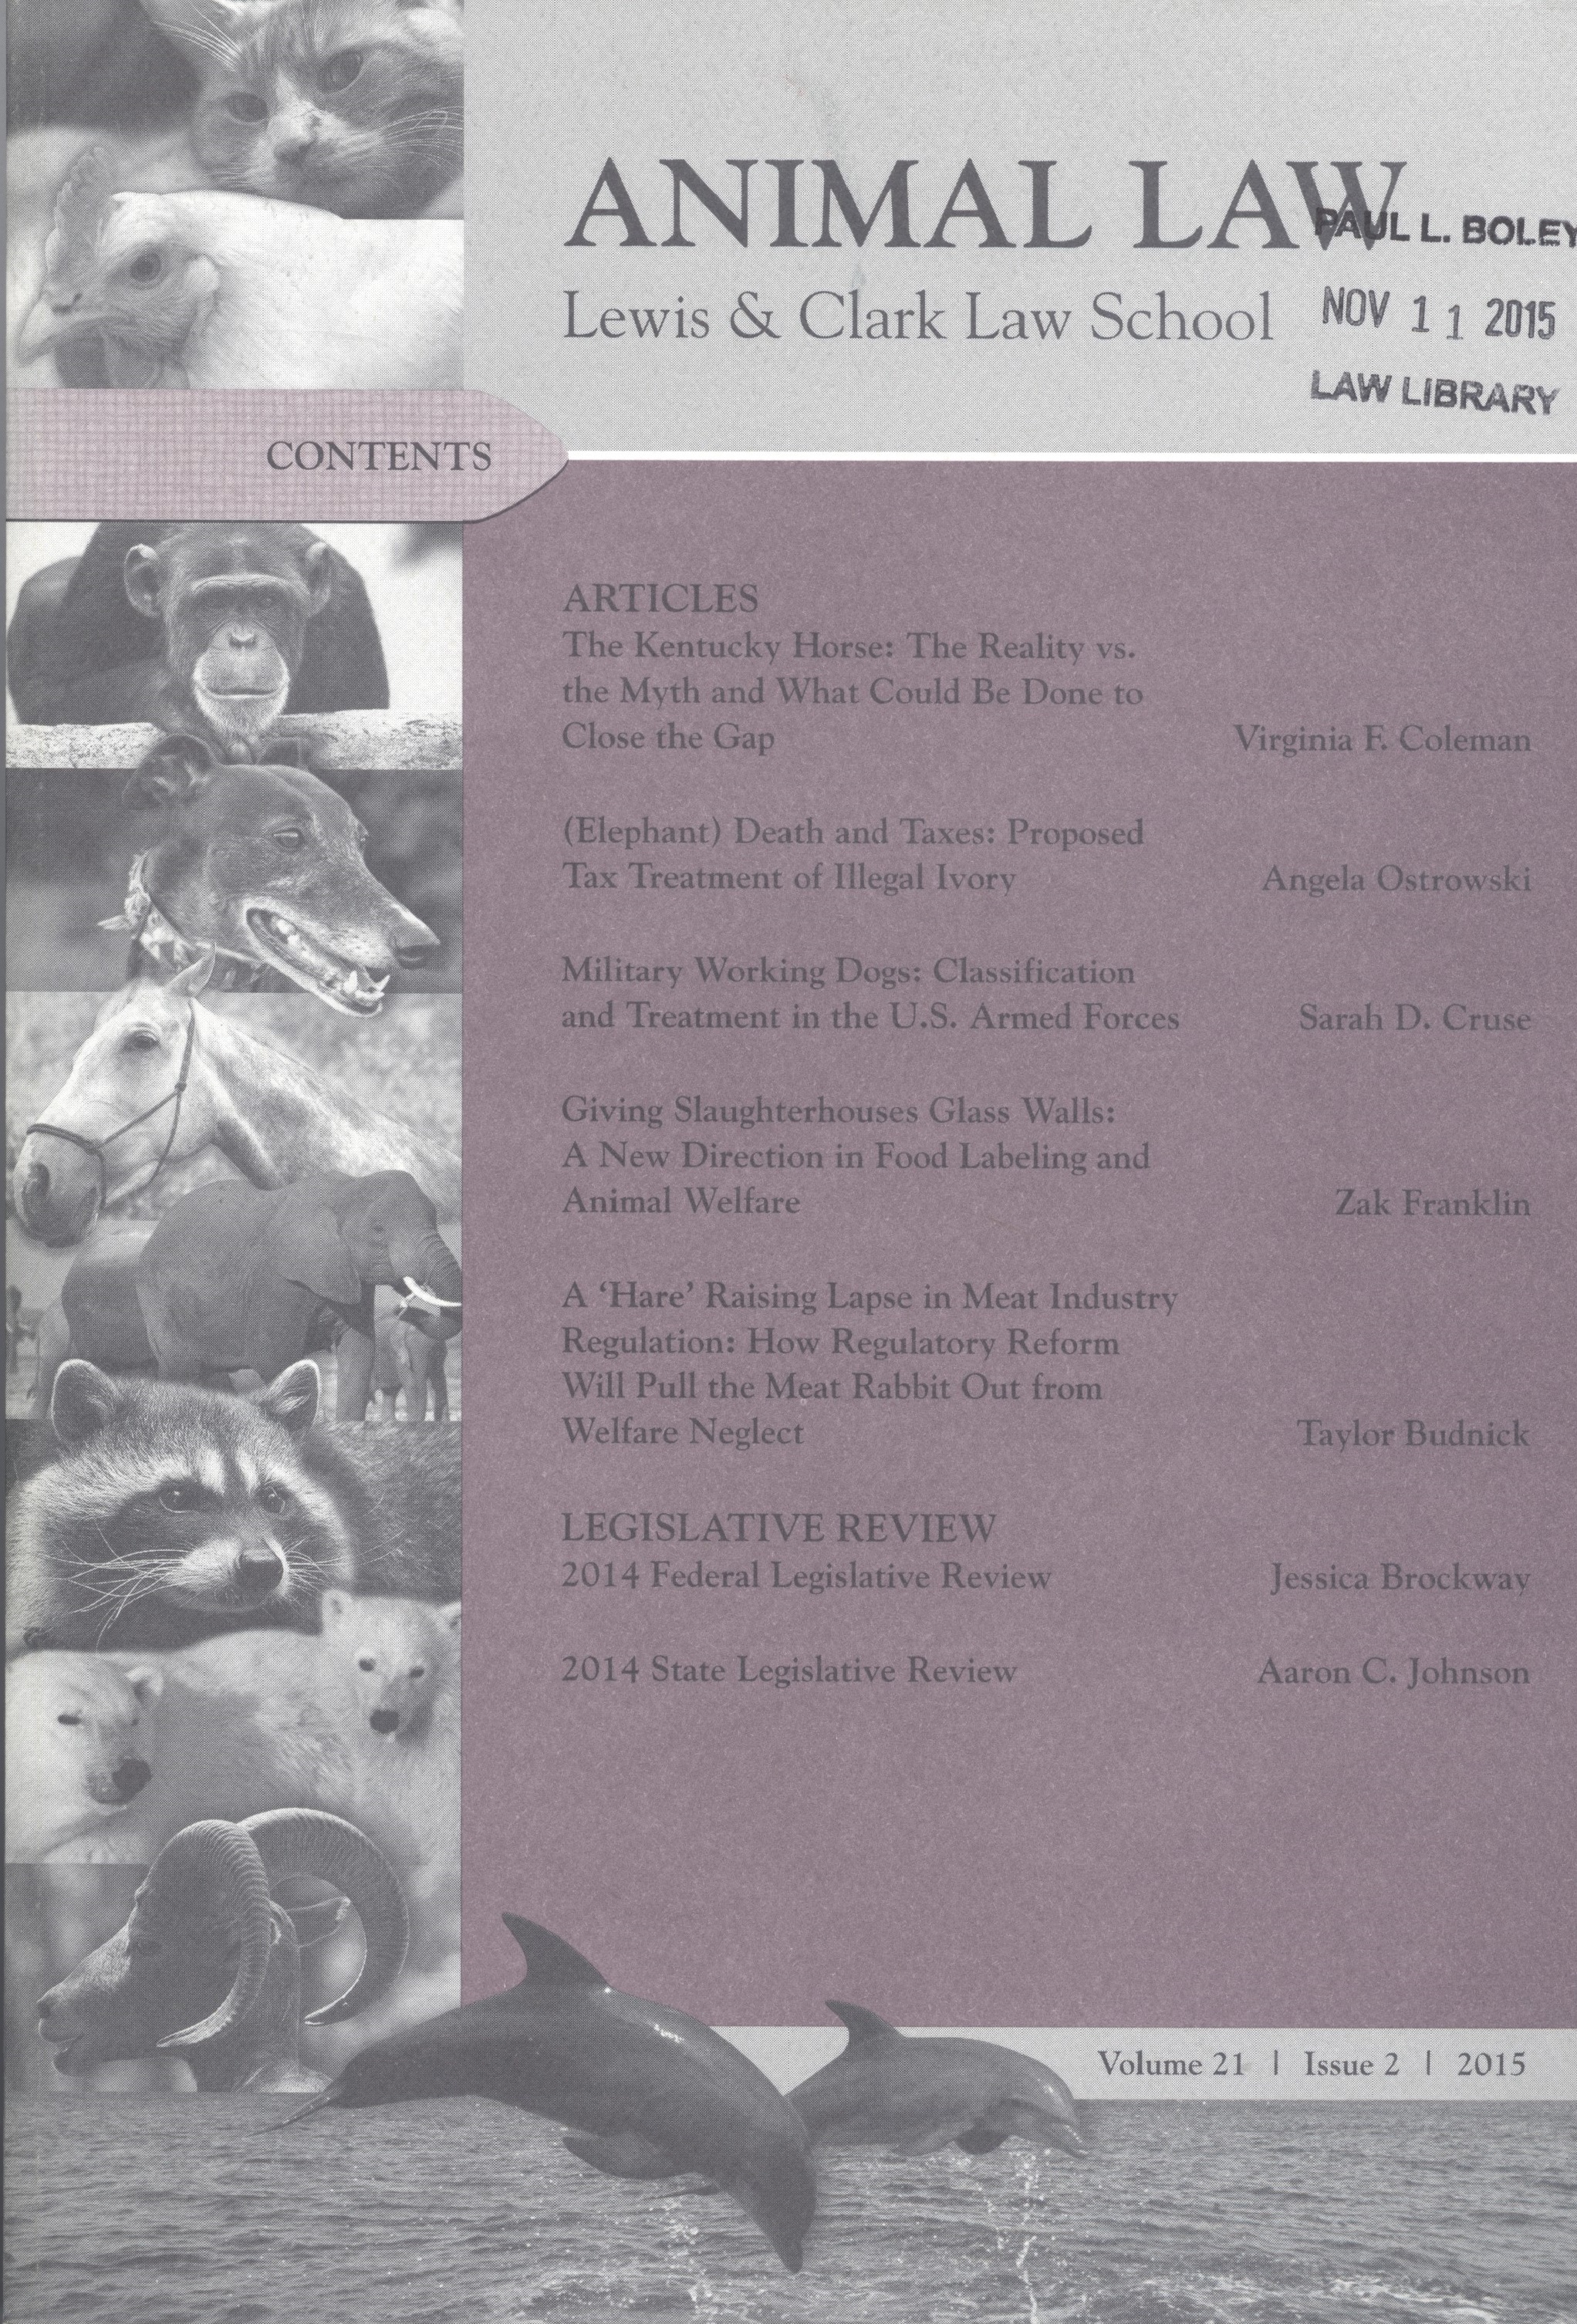 Cover of Animal Law Review Volume 21, Issue 2, 2015